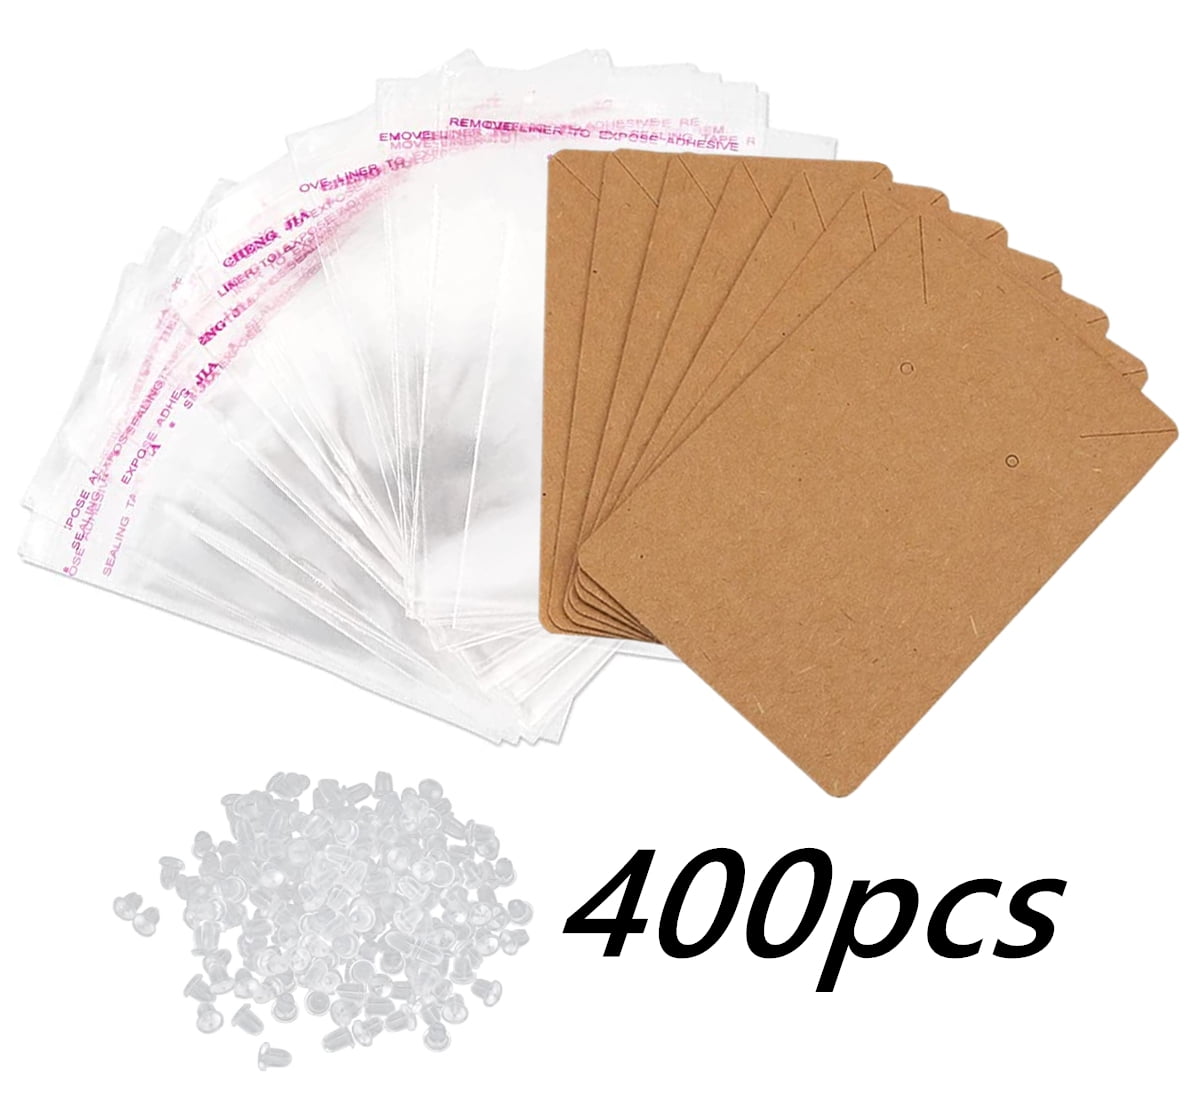 400 pcs Jewelry Display Kit 100 pcs Paper Necklace Display Cards 100 Earring  Packaging Holder Cards 200 pcs Clear Plastic Earring Backs for Earing  Jewelry Findings White 